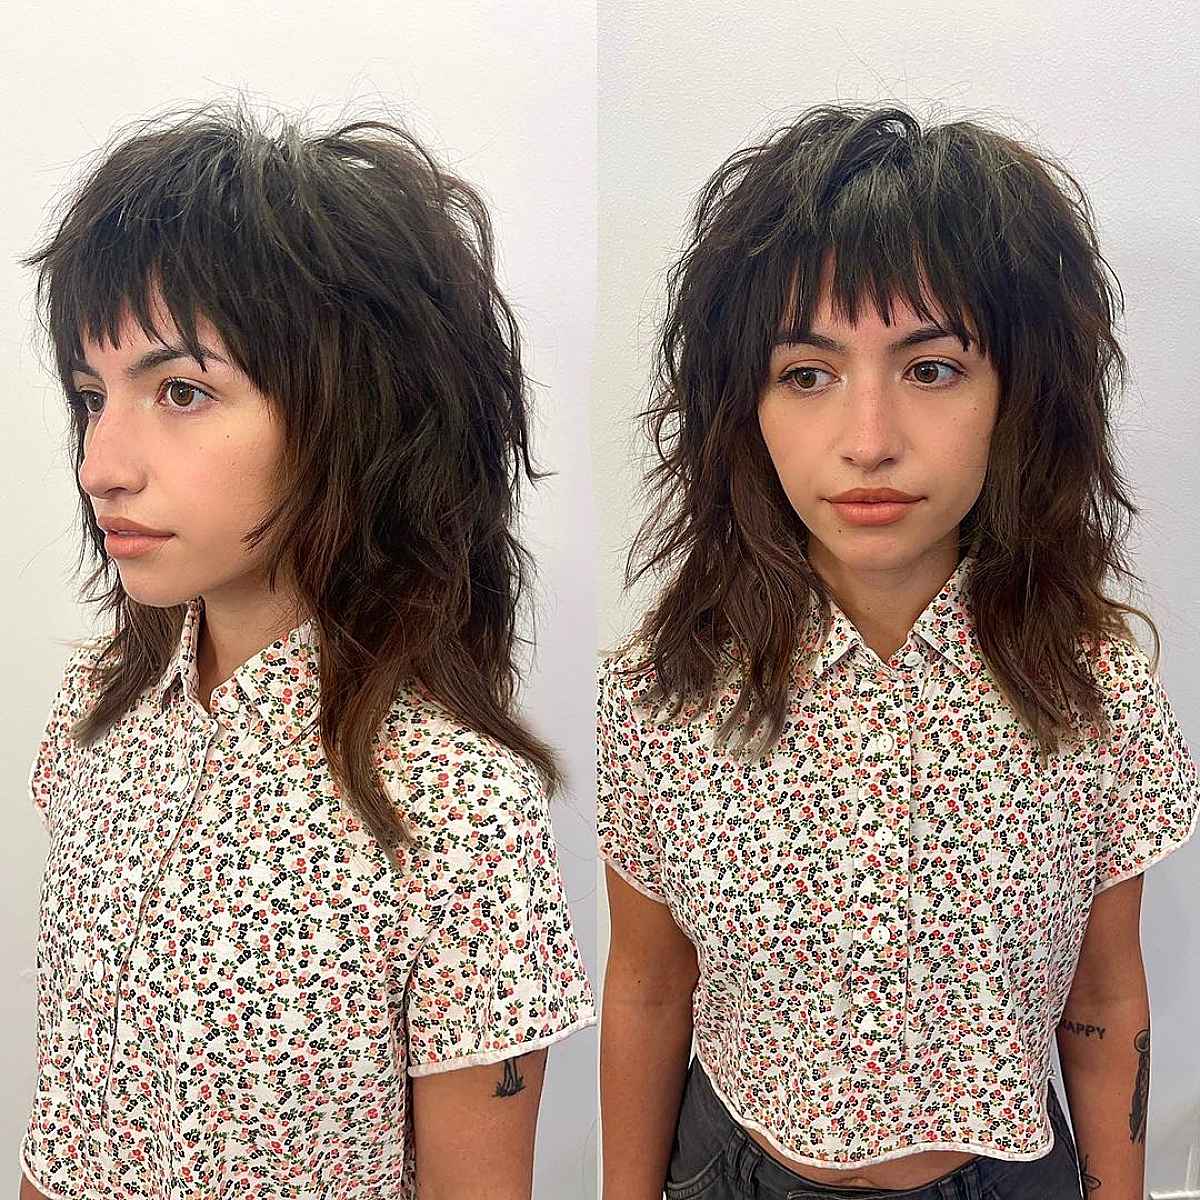 33 Greatest Ways to Pair a Wolf Cut with Bangs